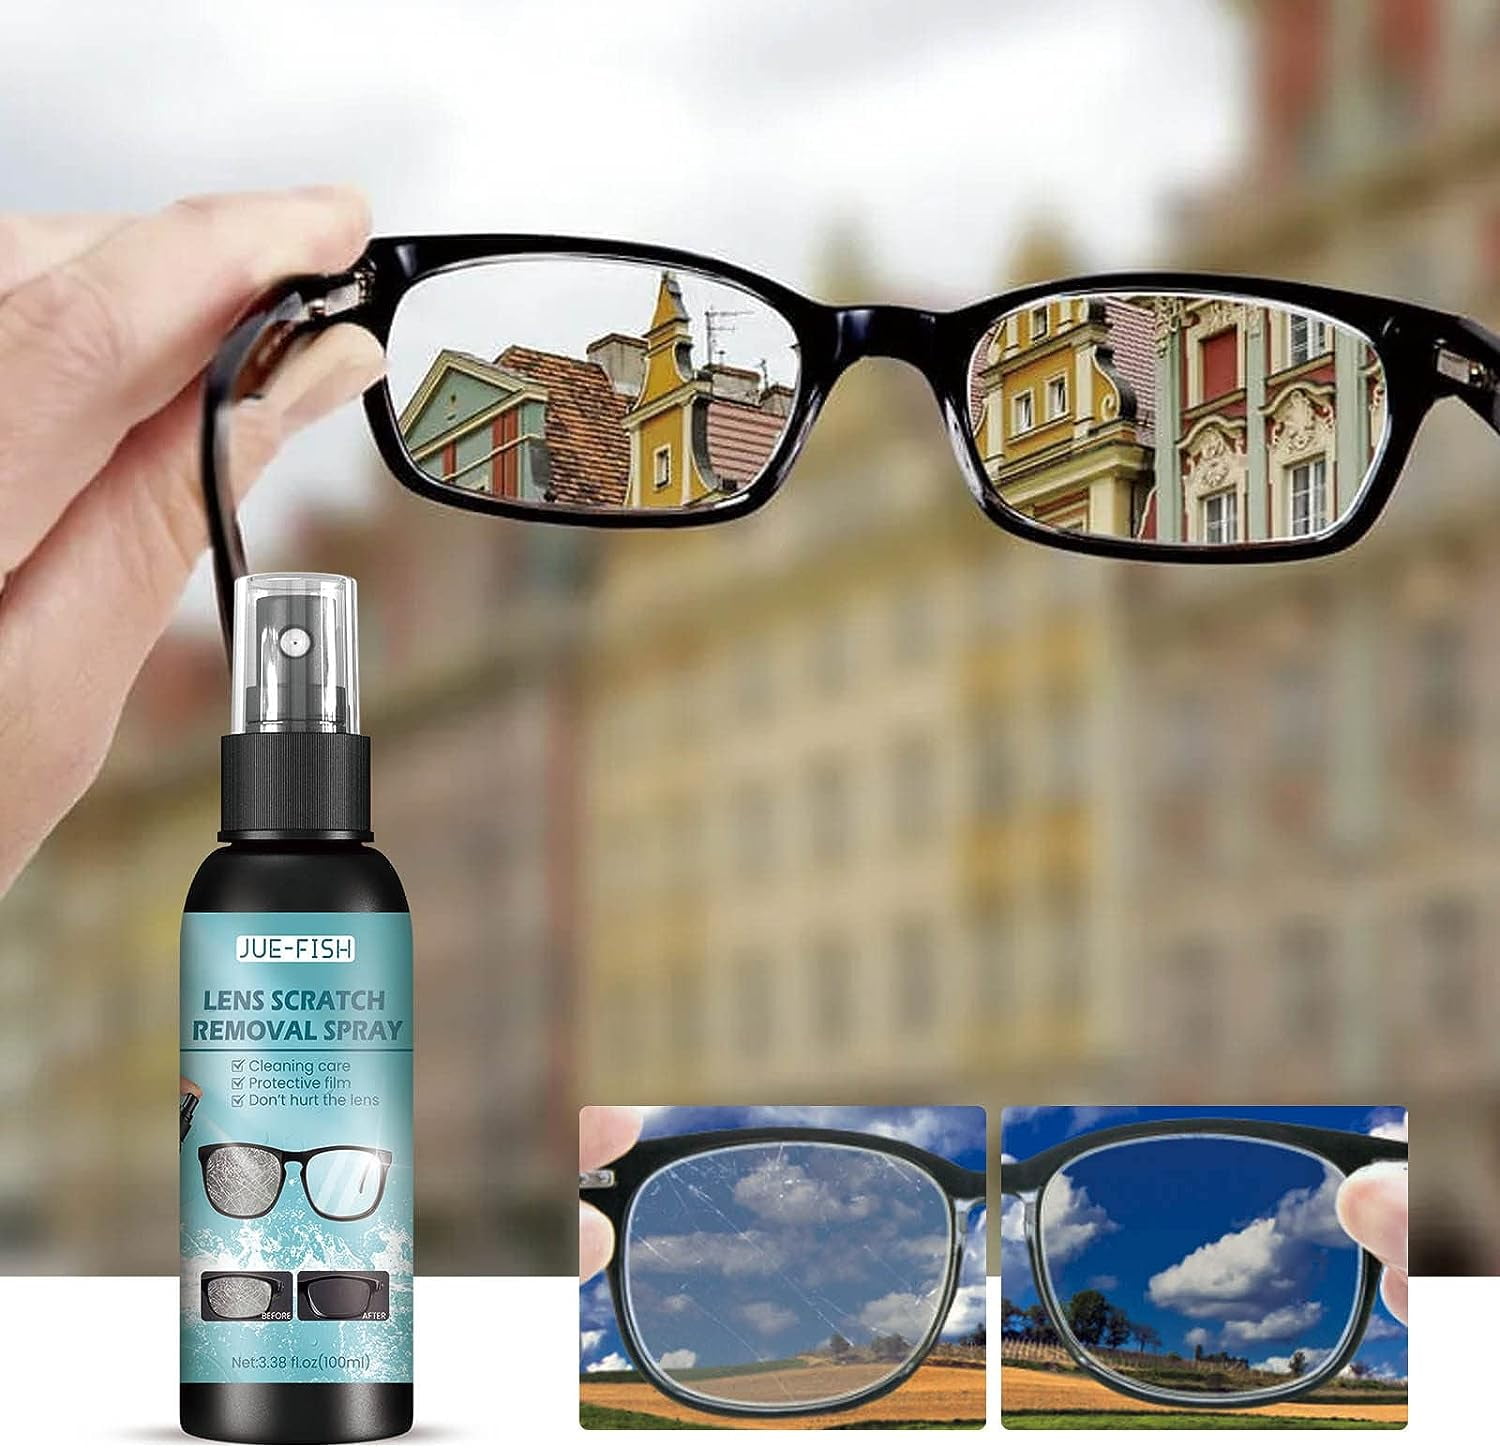  YOFOKO Lens Scratch Removal Spray, Mirror Scratch Remover,  Eyeglass Windshield Glass Repair Liquid, Lens Clearing Spray, Sunglasses  and Eyeglass Lens Scratch Repair Fluid Spray Type : Health & Household